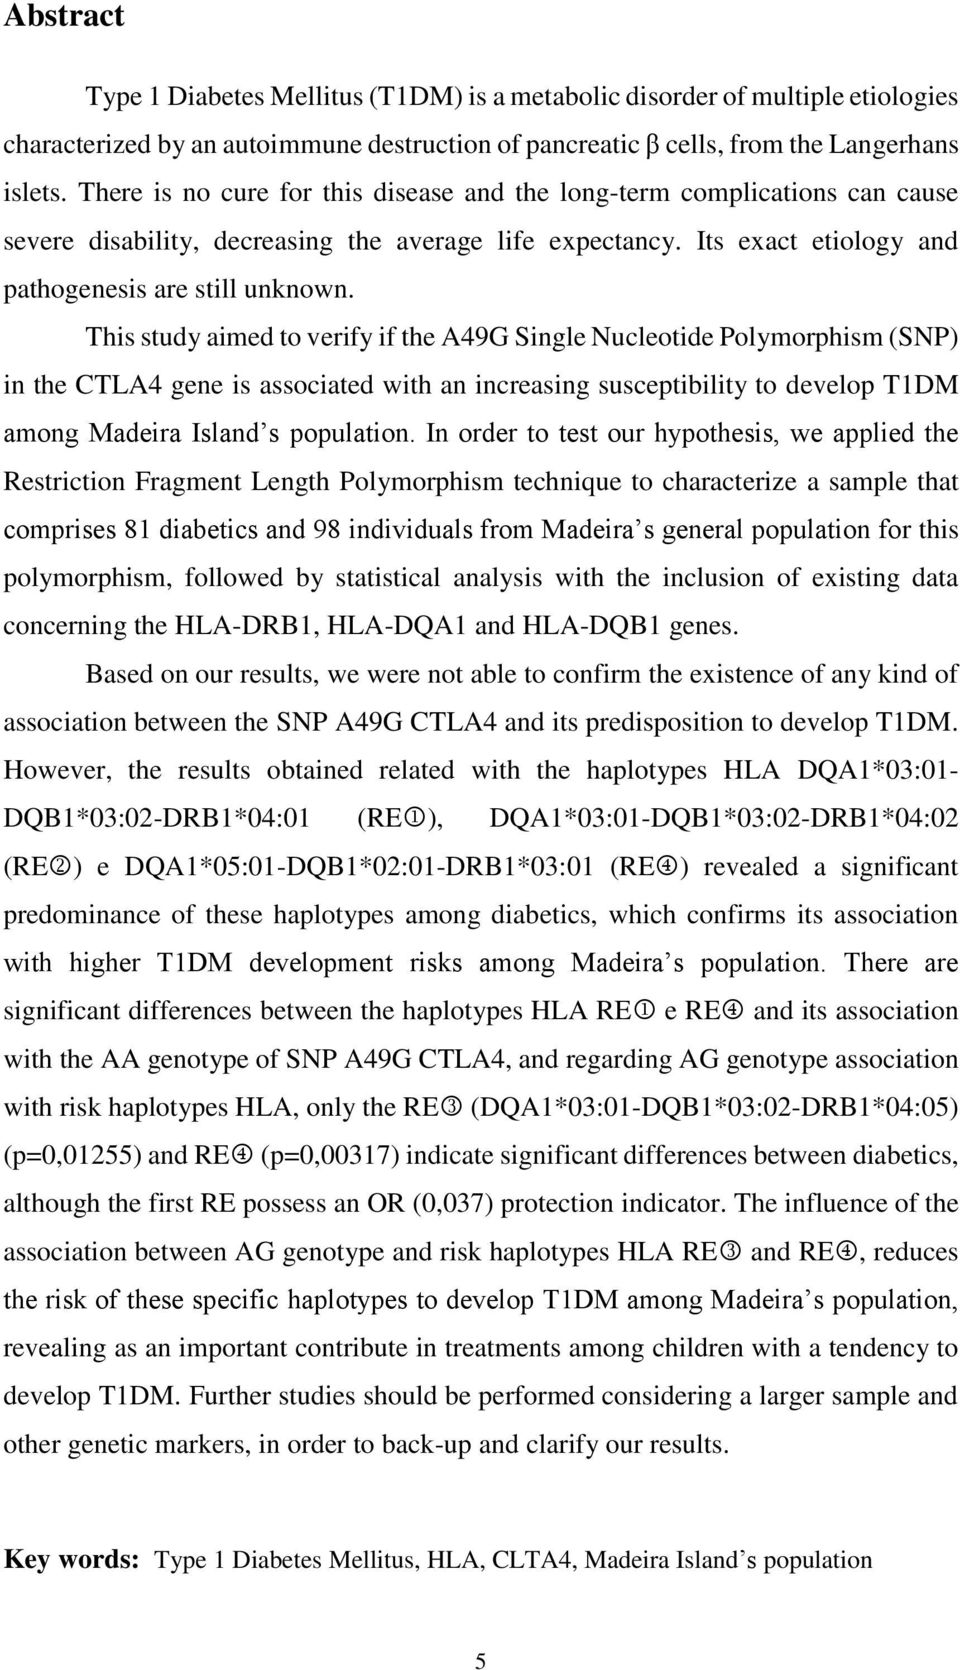 This study aimed to verify if the A49G Single Nucleotide Polymorphism (SNP) in the CTLA4 gene is associated with an increasing susceptibility to develop T1DM among Madeira Island s population.